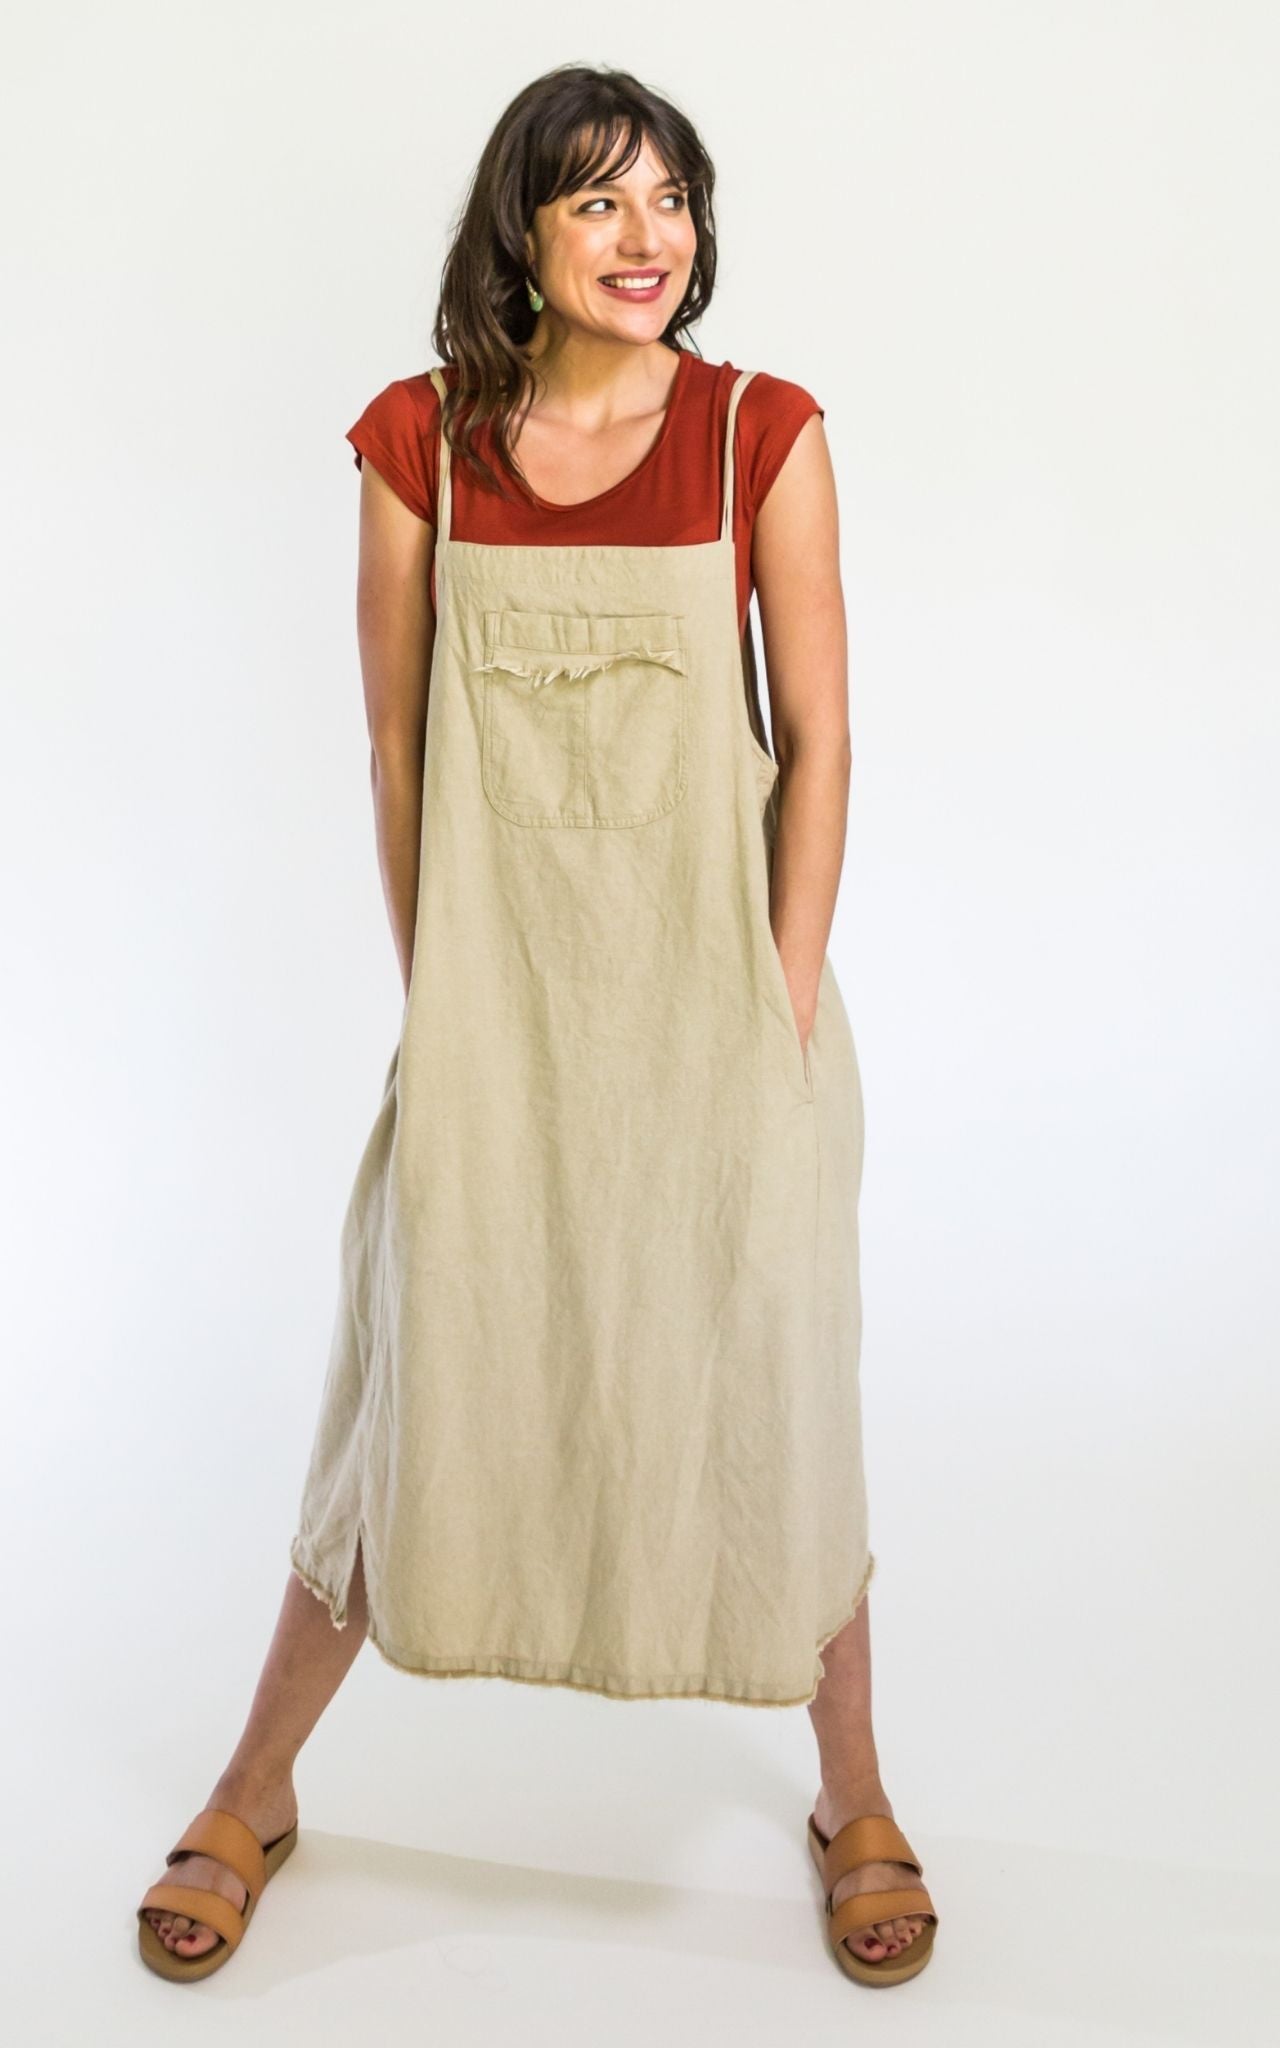 Surya Australia Ethical Cotton 'Sirena' Pinafore made in Nepal - Oatmeal